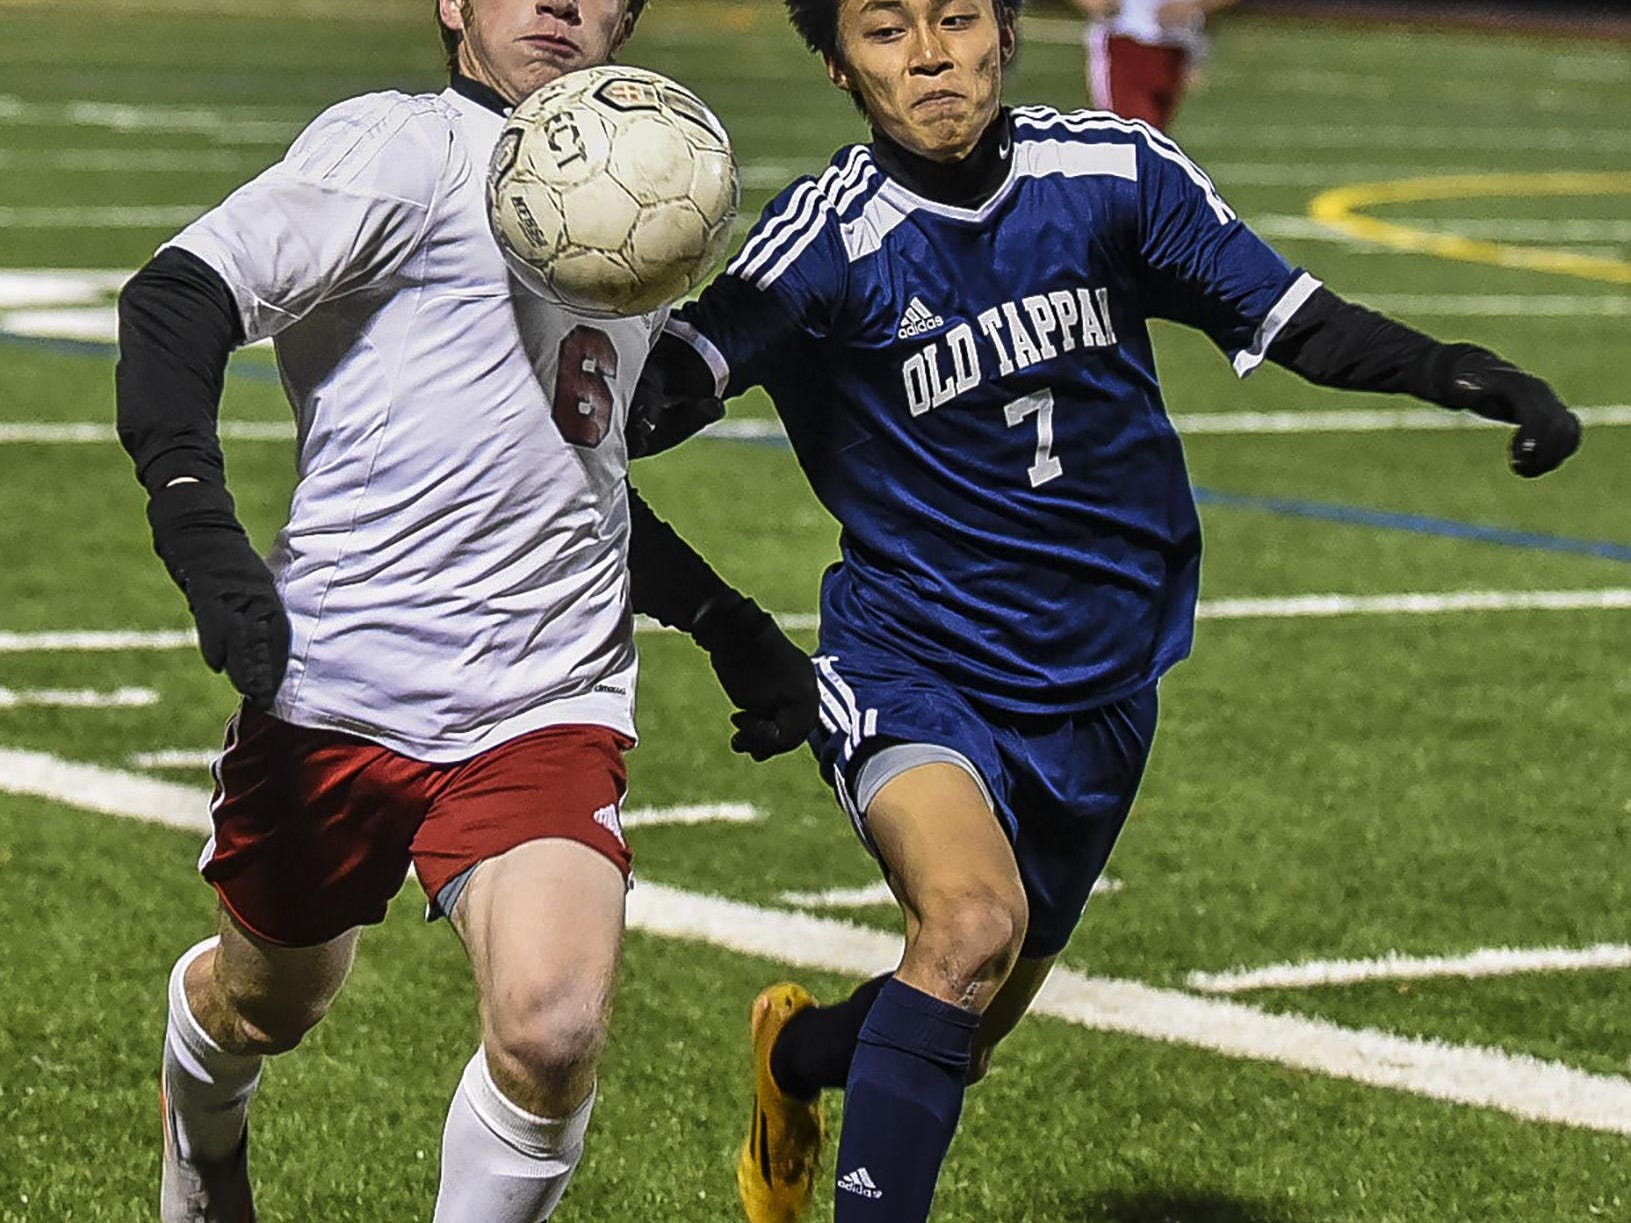 Mendham's Matt Hanks (6) and Old Tappan's Chris Lea (7) vie for the ball in the NJSIAA Group III Semifinal at Ridge High School in Basking Ridge, November 17, 2015. Photo by Warren Wetura for the Daily Record.